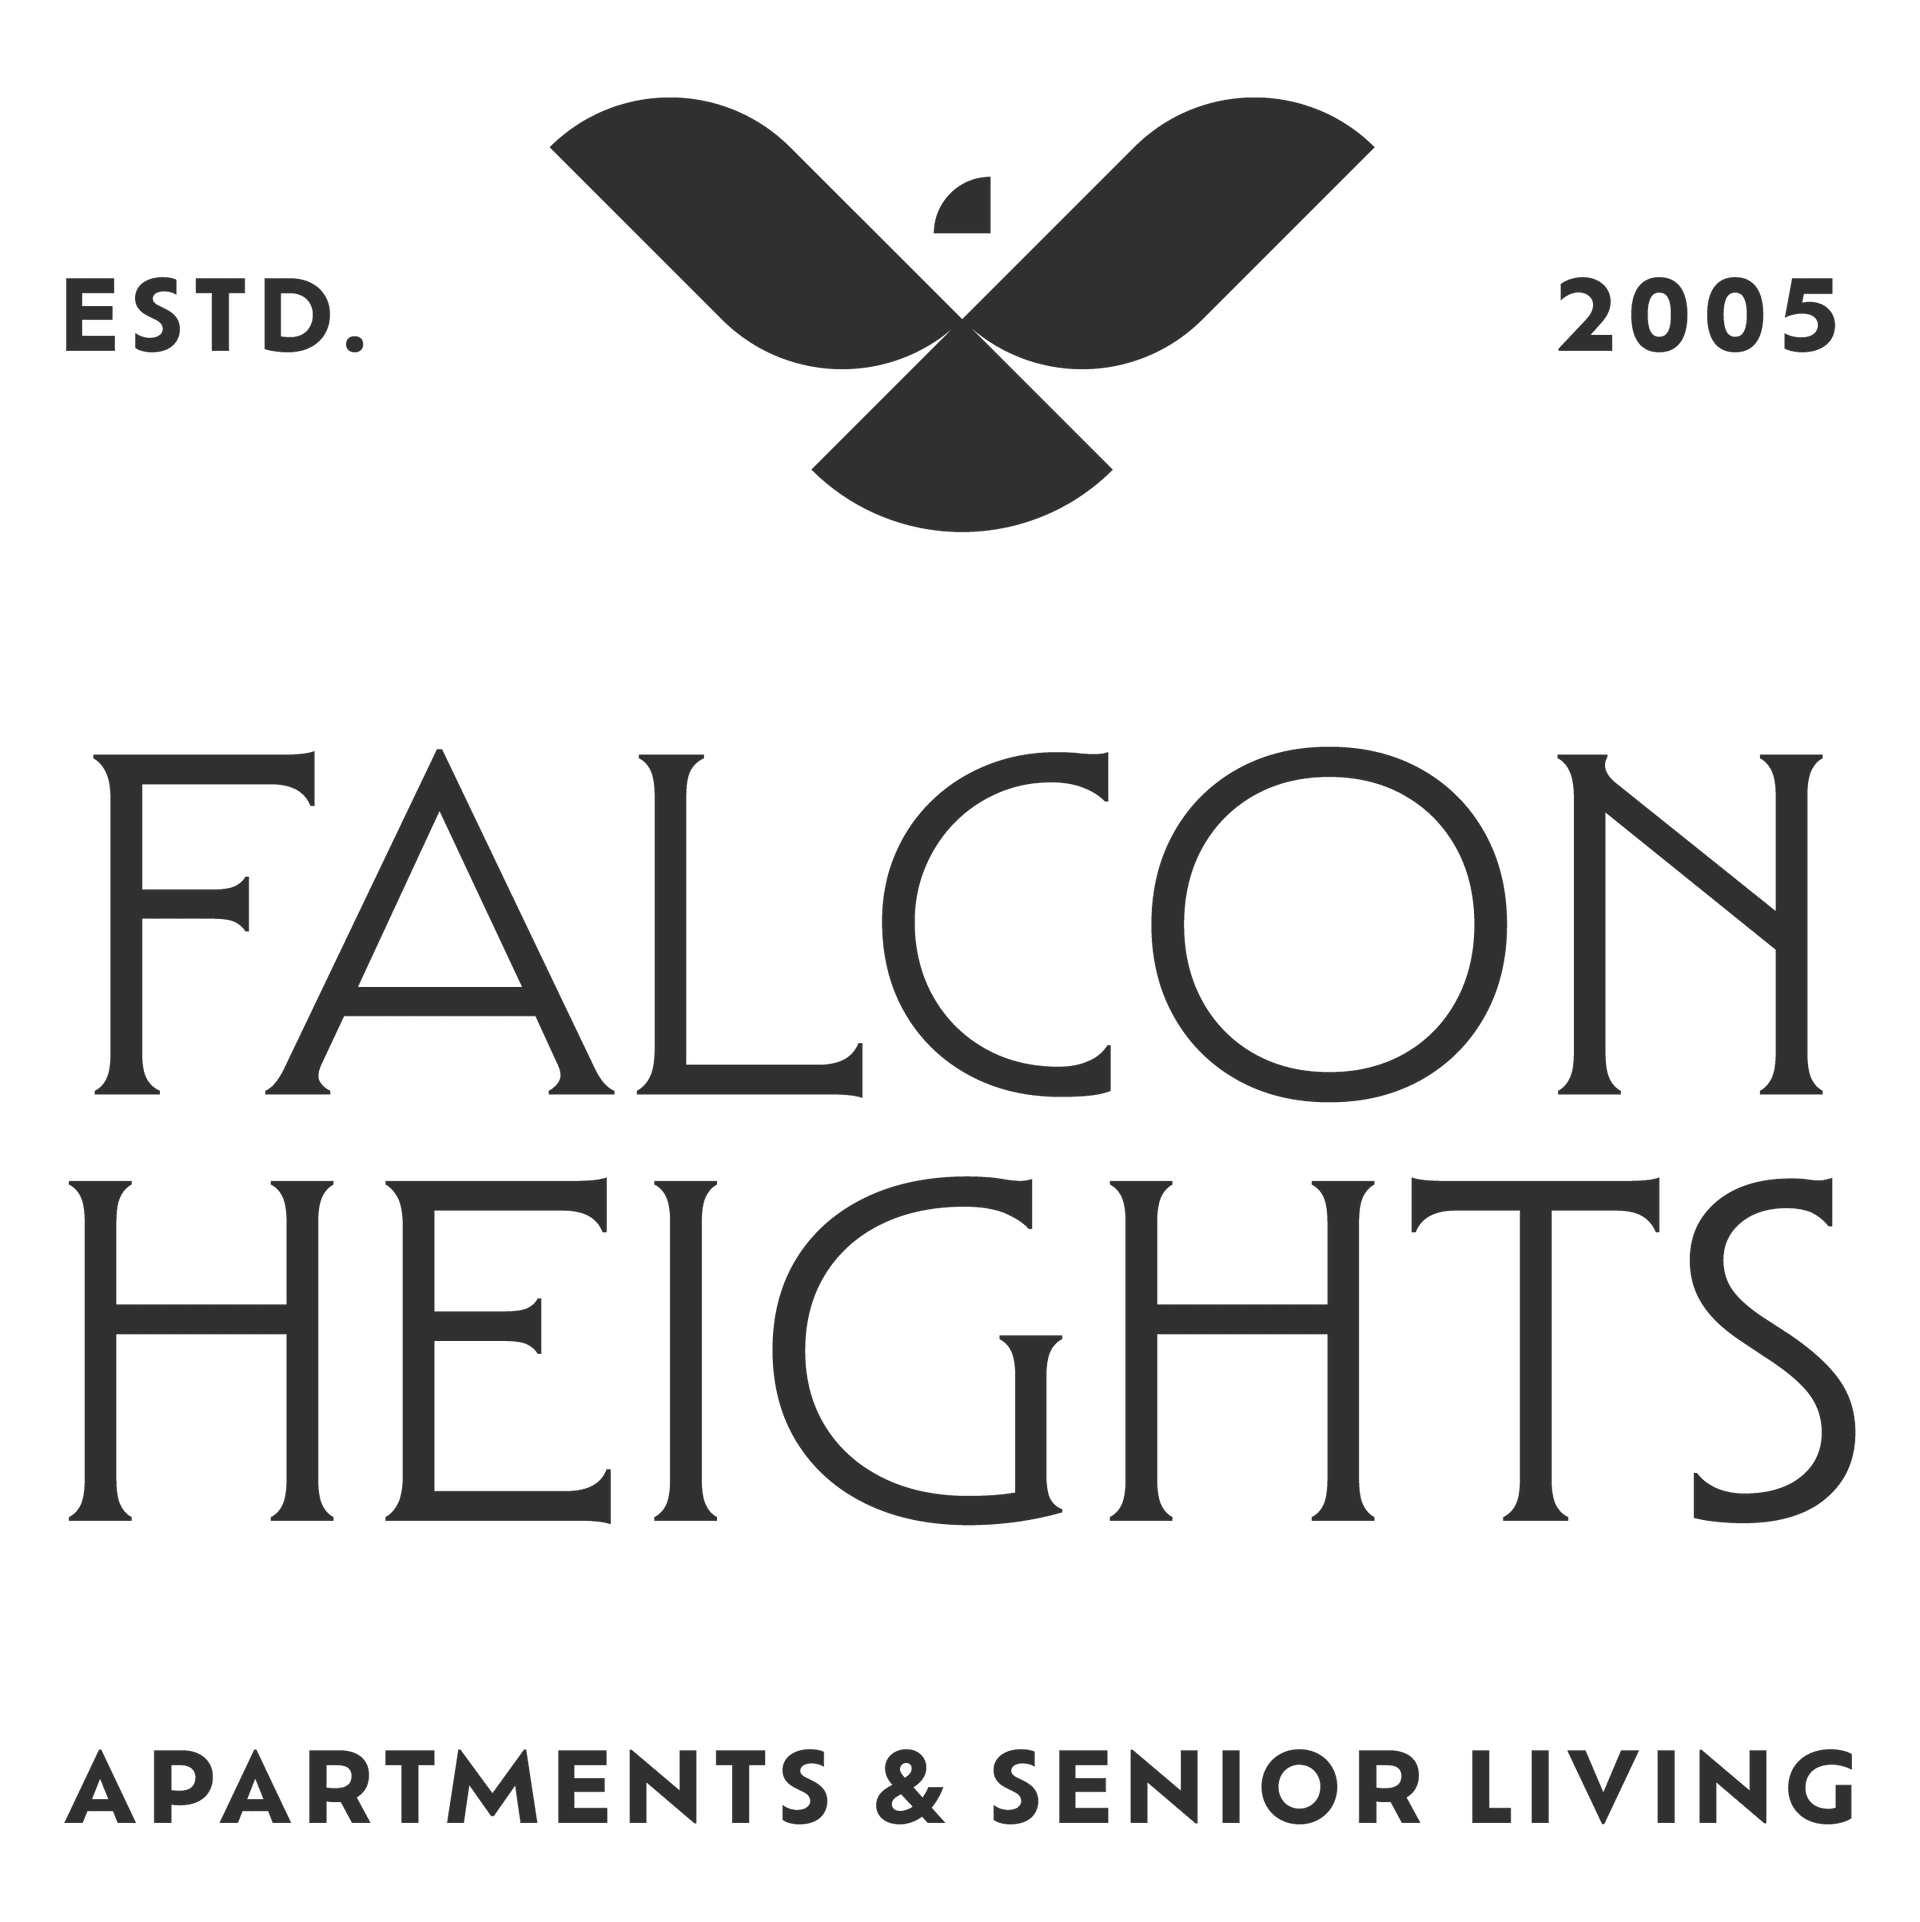 Falcon Heights